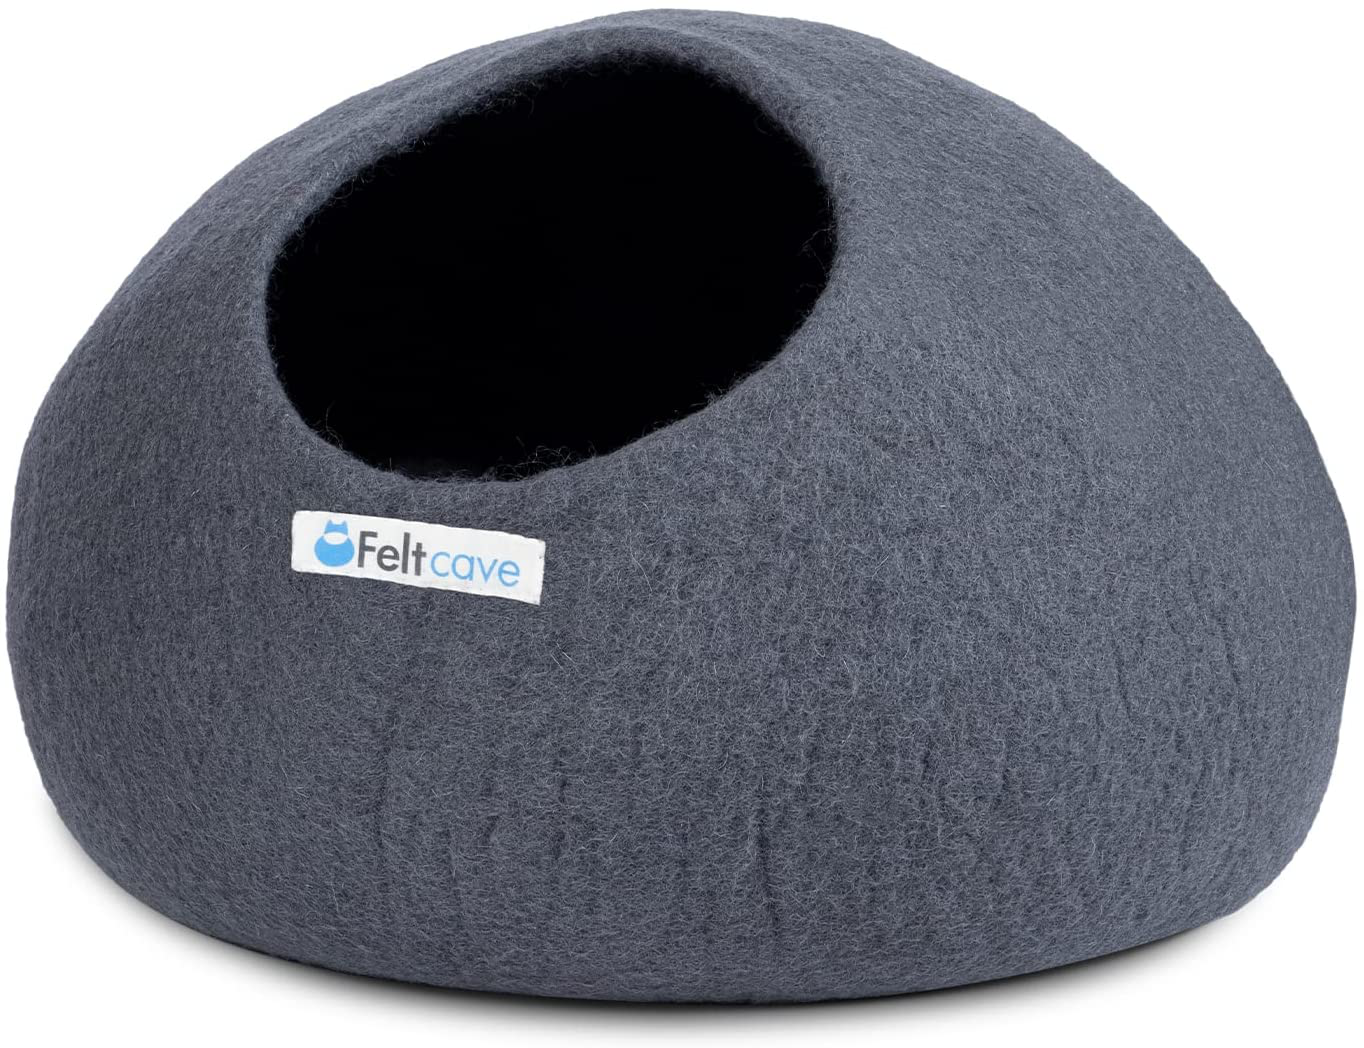 Feltcave Extra Large Cat Cave Bed, Handmade Cat Hideaway, Wool Cat Cave Large, Wooly Cave for Cats Hideout, Felt Cat Cave Beds for Indoor Cats